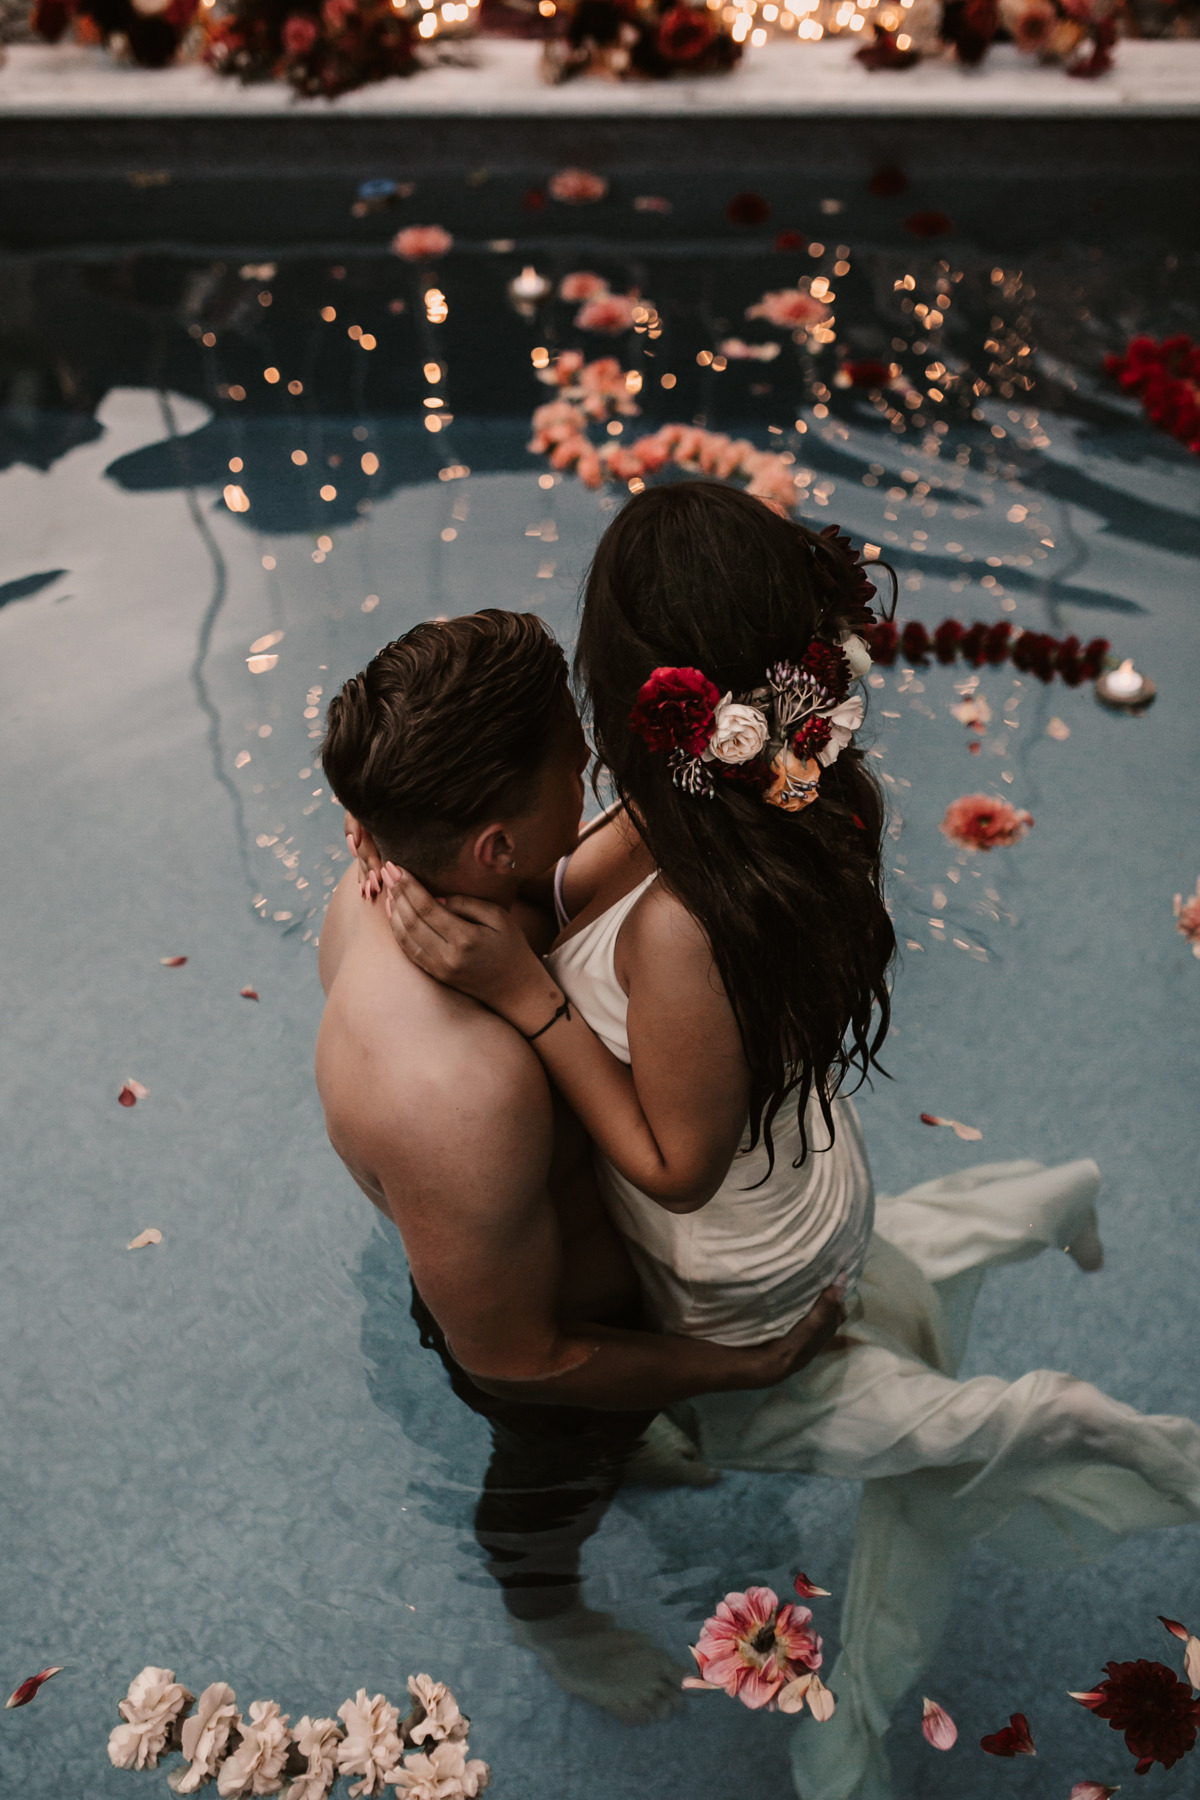 A Steamy Spanish-Inspired Shoot Where Tattoos Are The New Must-Have Wedding Accessory